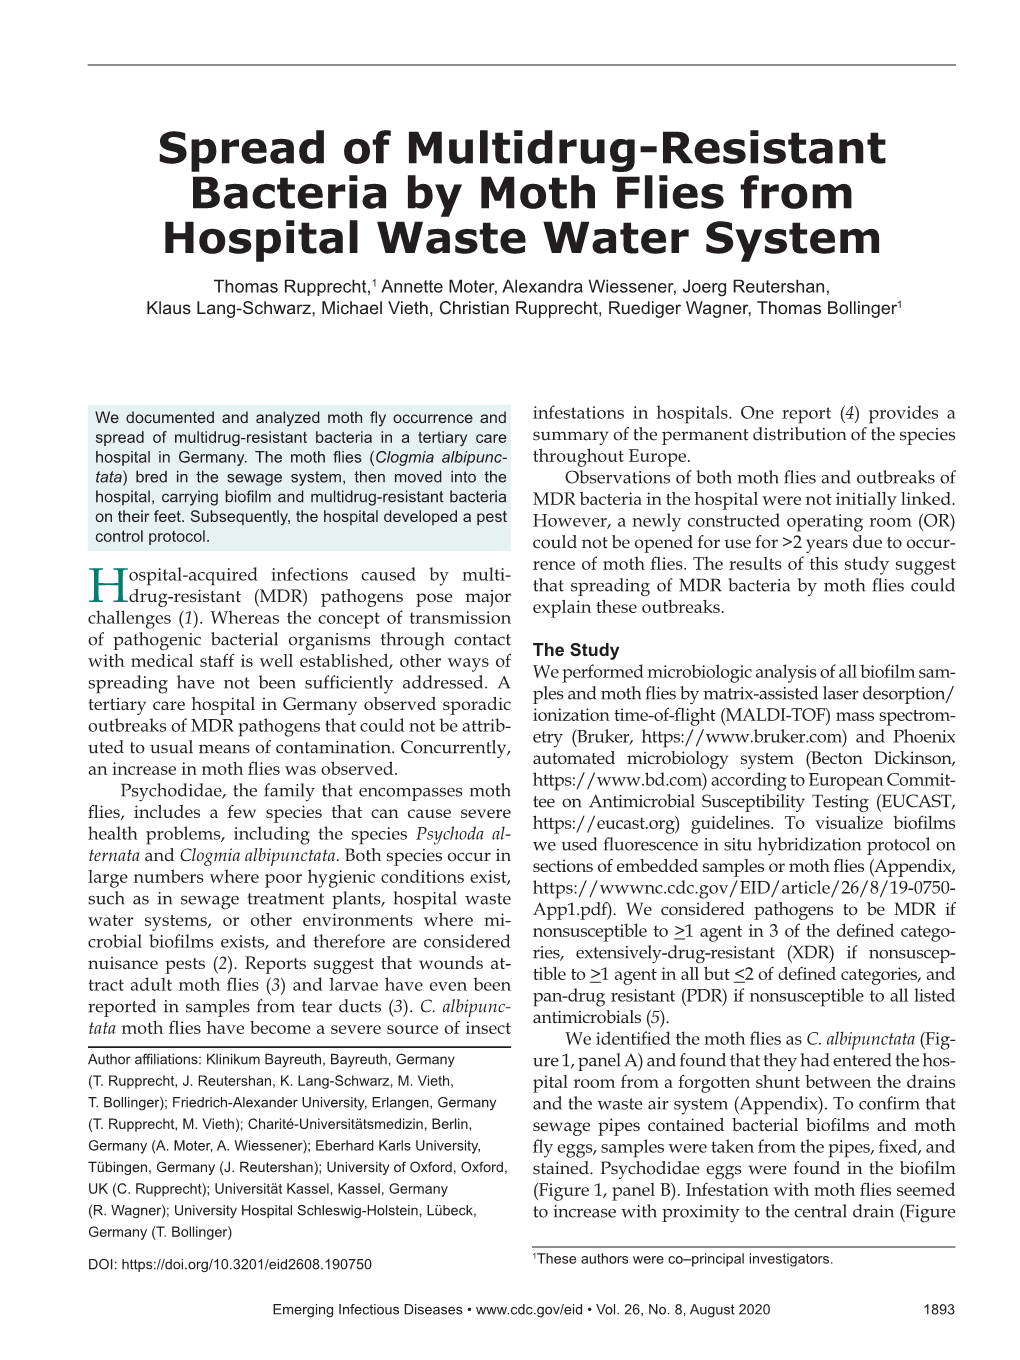 Spread of Multidrug-Resistant Bacteria by Moth Flies From